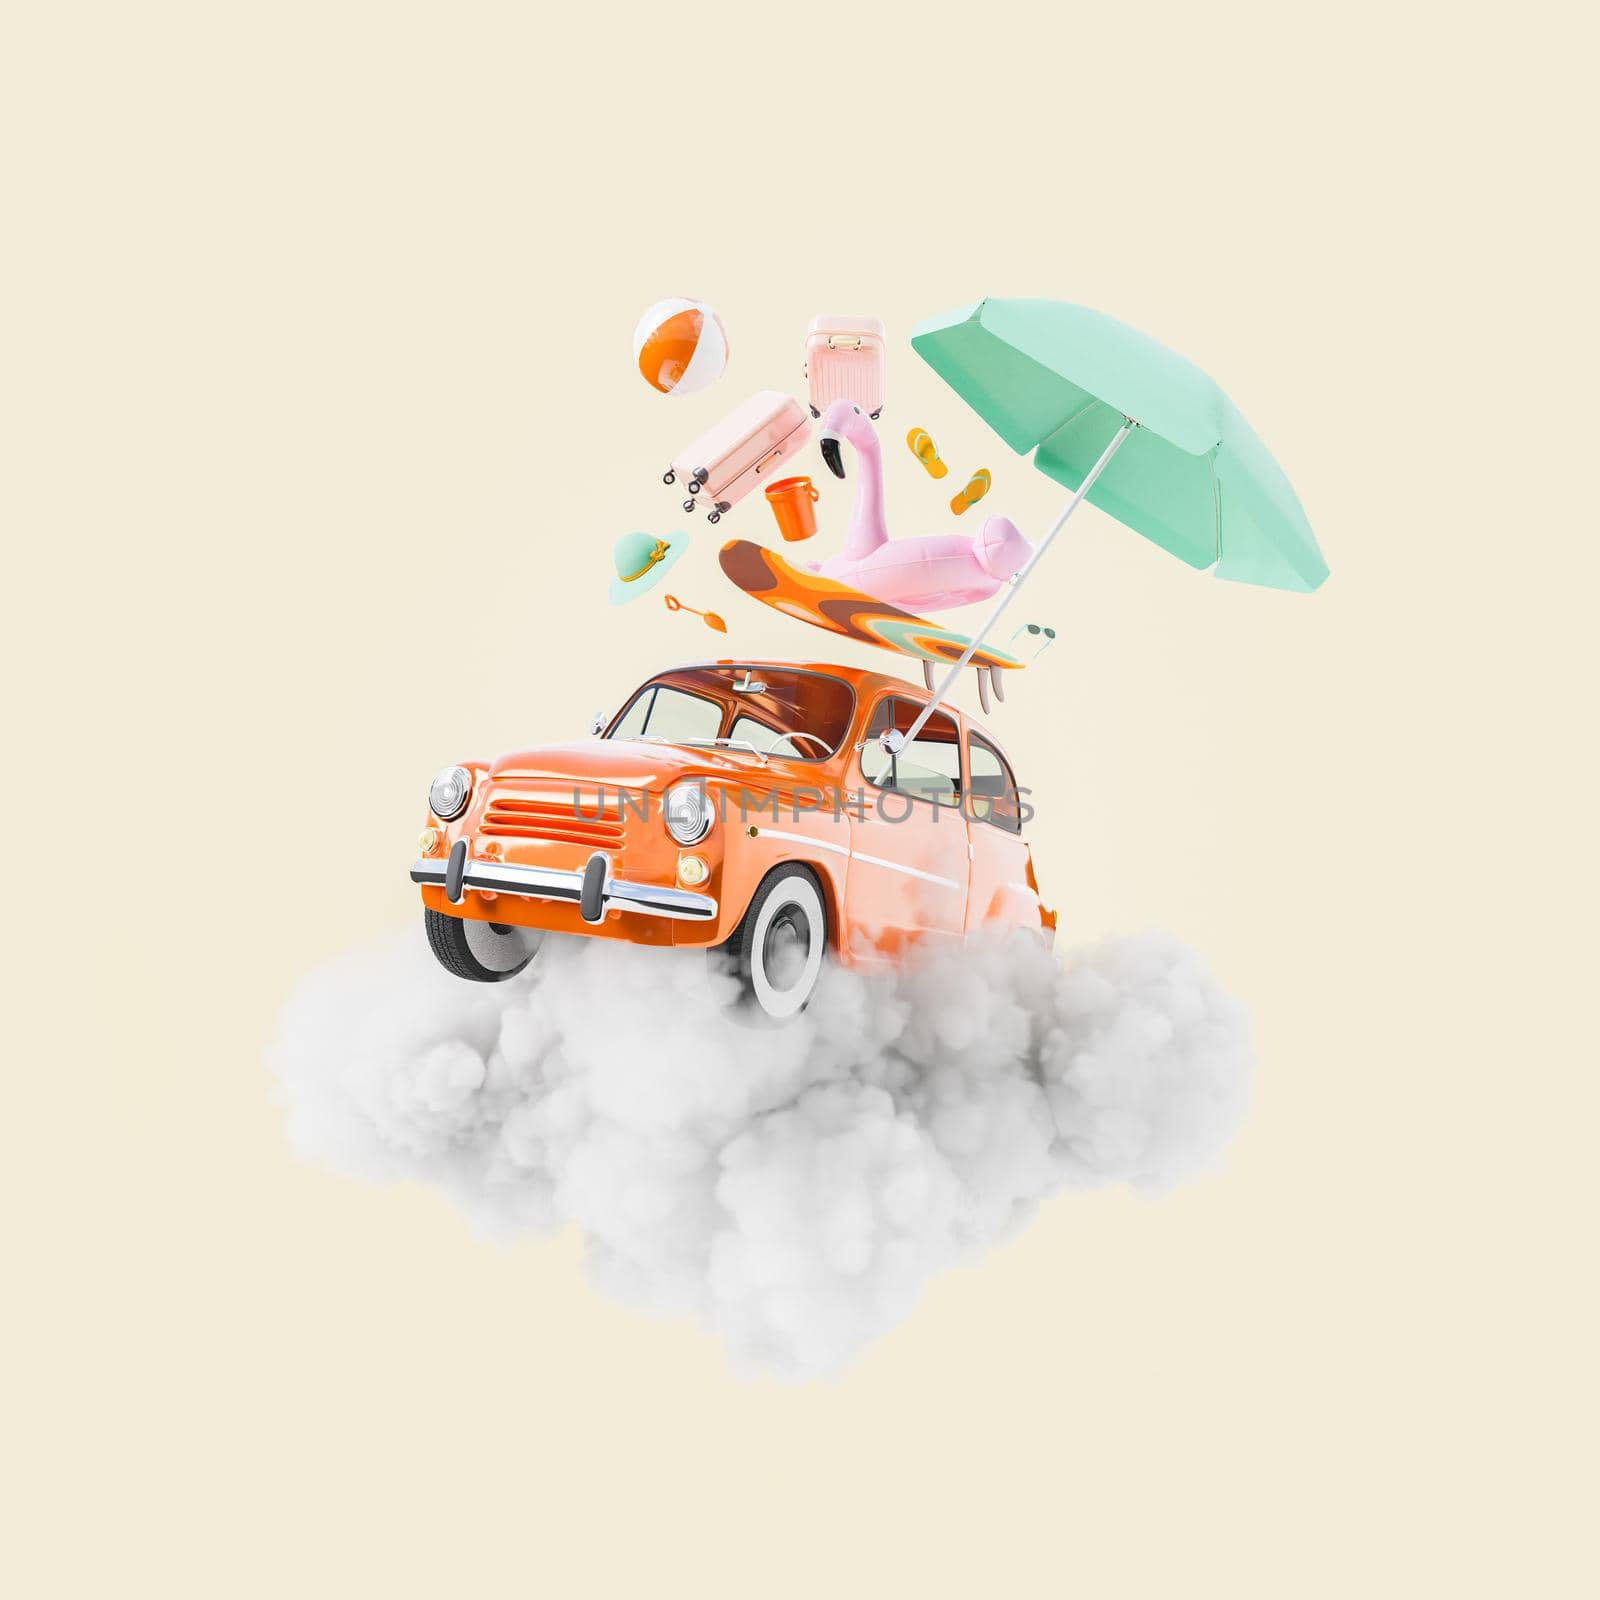 3D illustration of red vintage car with assorted beach supplies flying on gray storm cloud during summer vacation against light yellow background